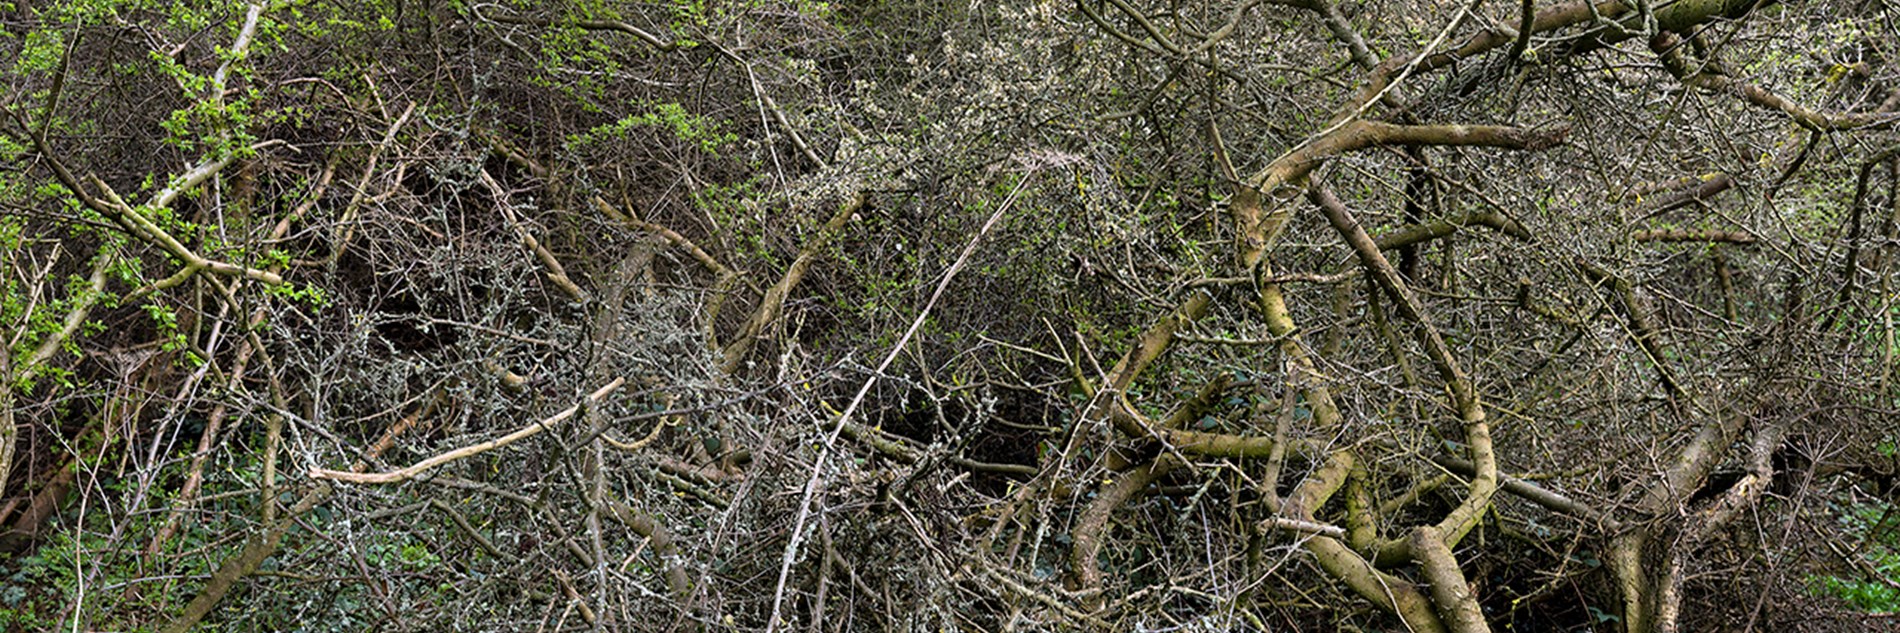 A natural scene focusing on a dense, tall hedgerow. Photographed in high definition at close range so that the twigs and branches form a pattern.